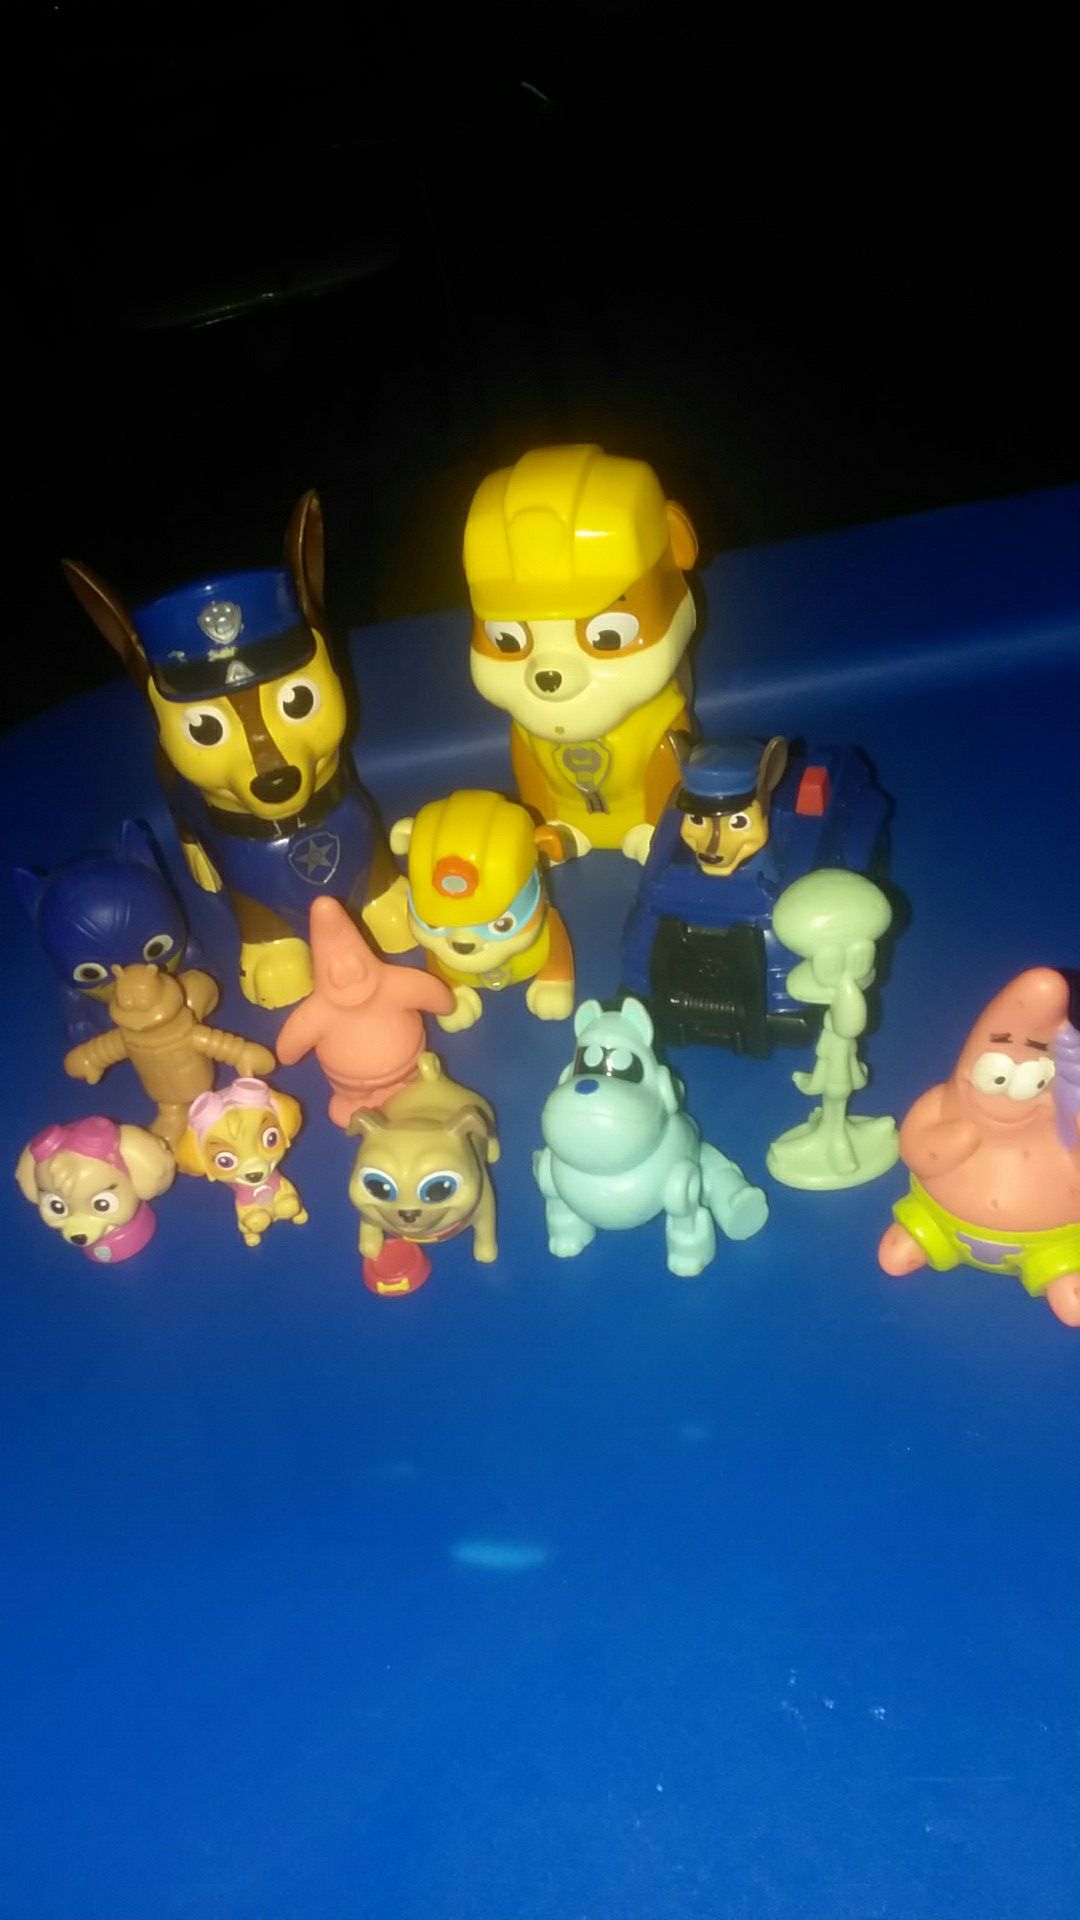 Paw patrol & puppy pals characters from spongebob